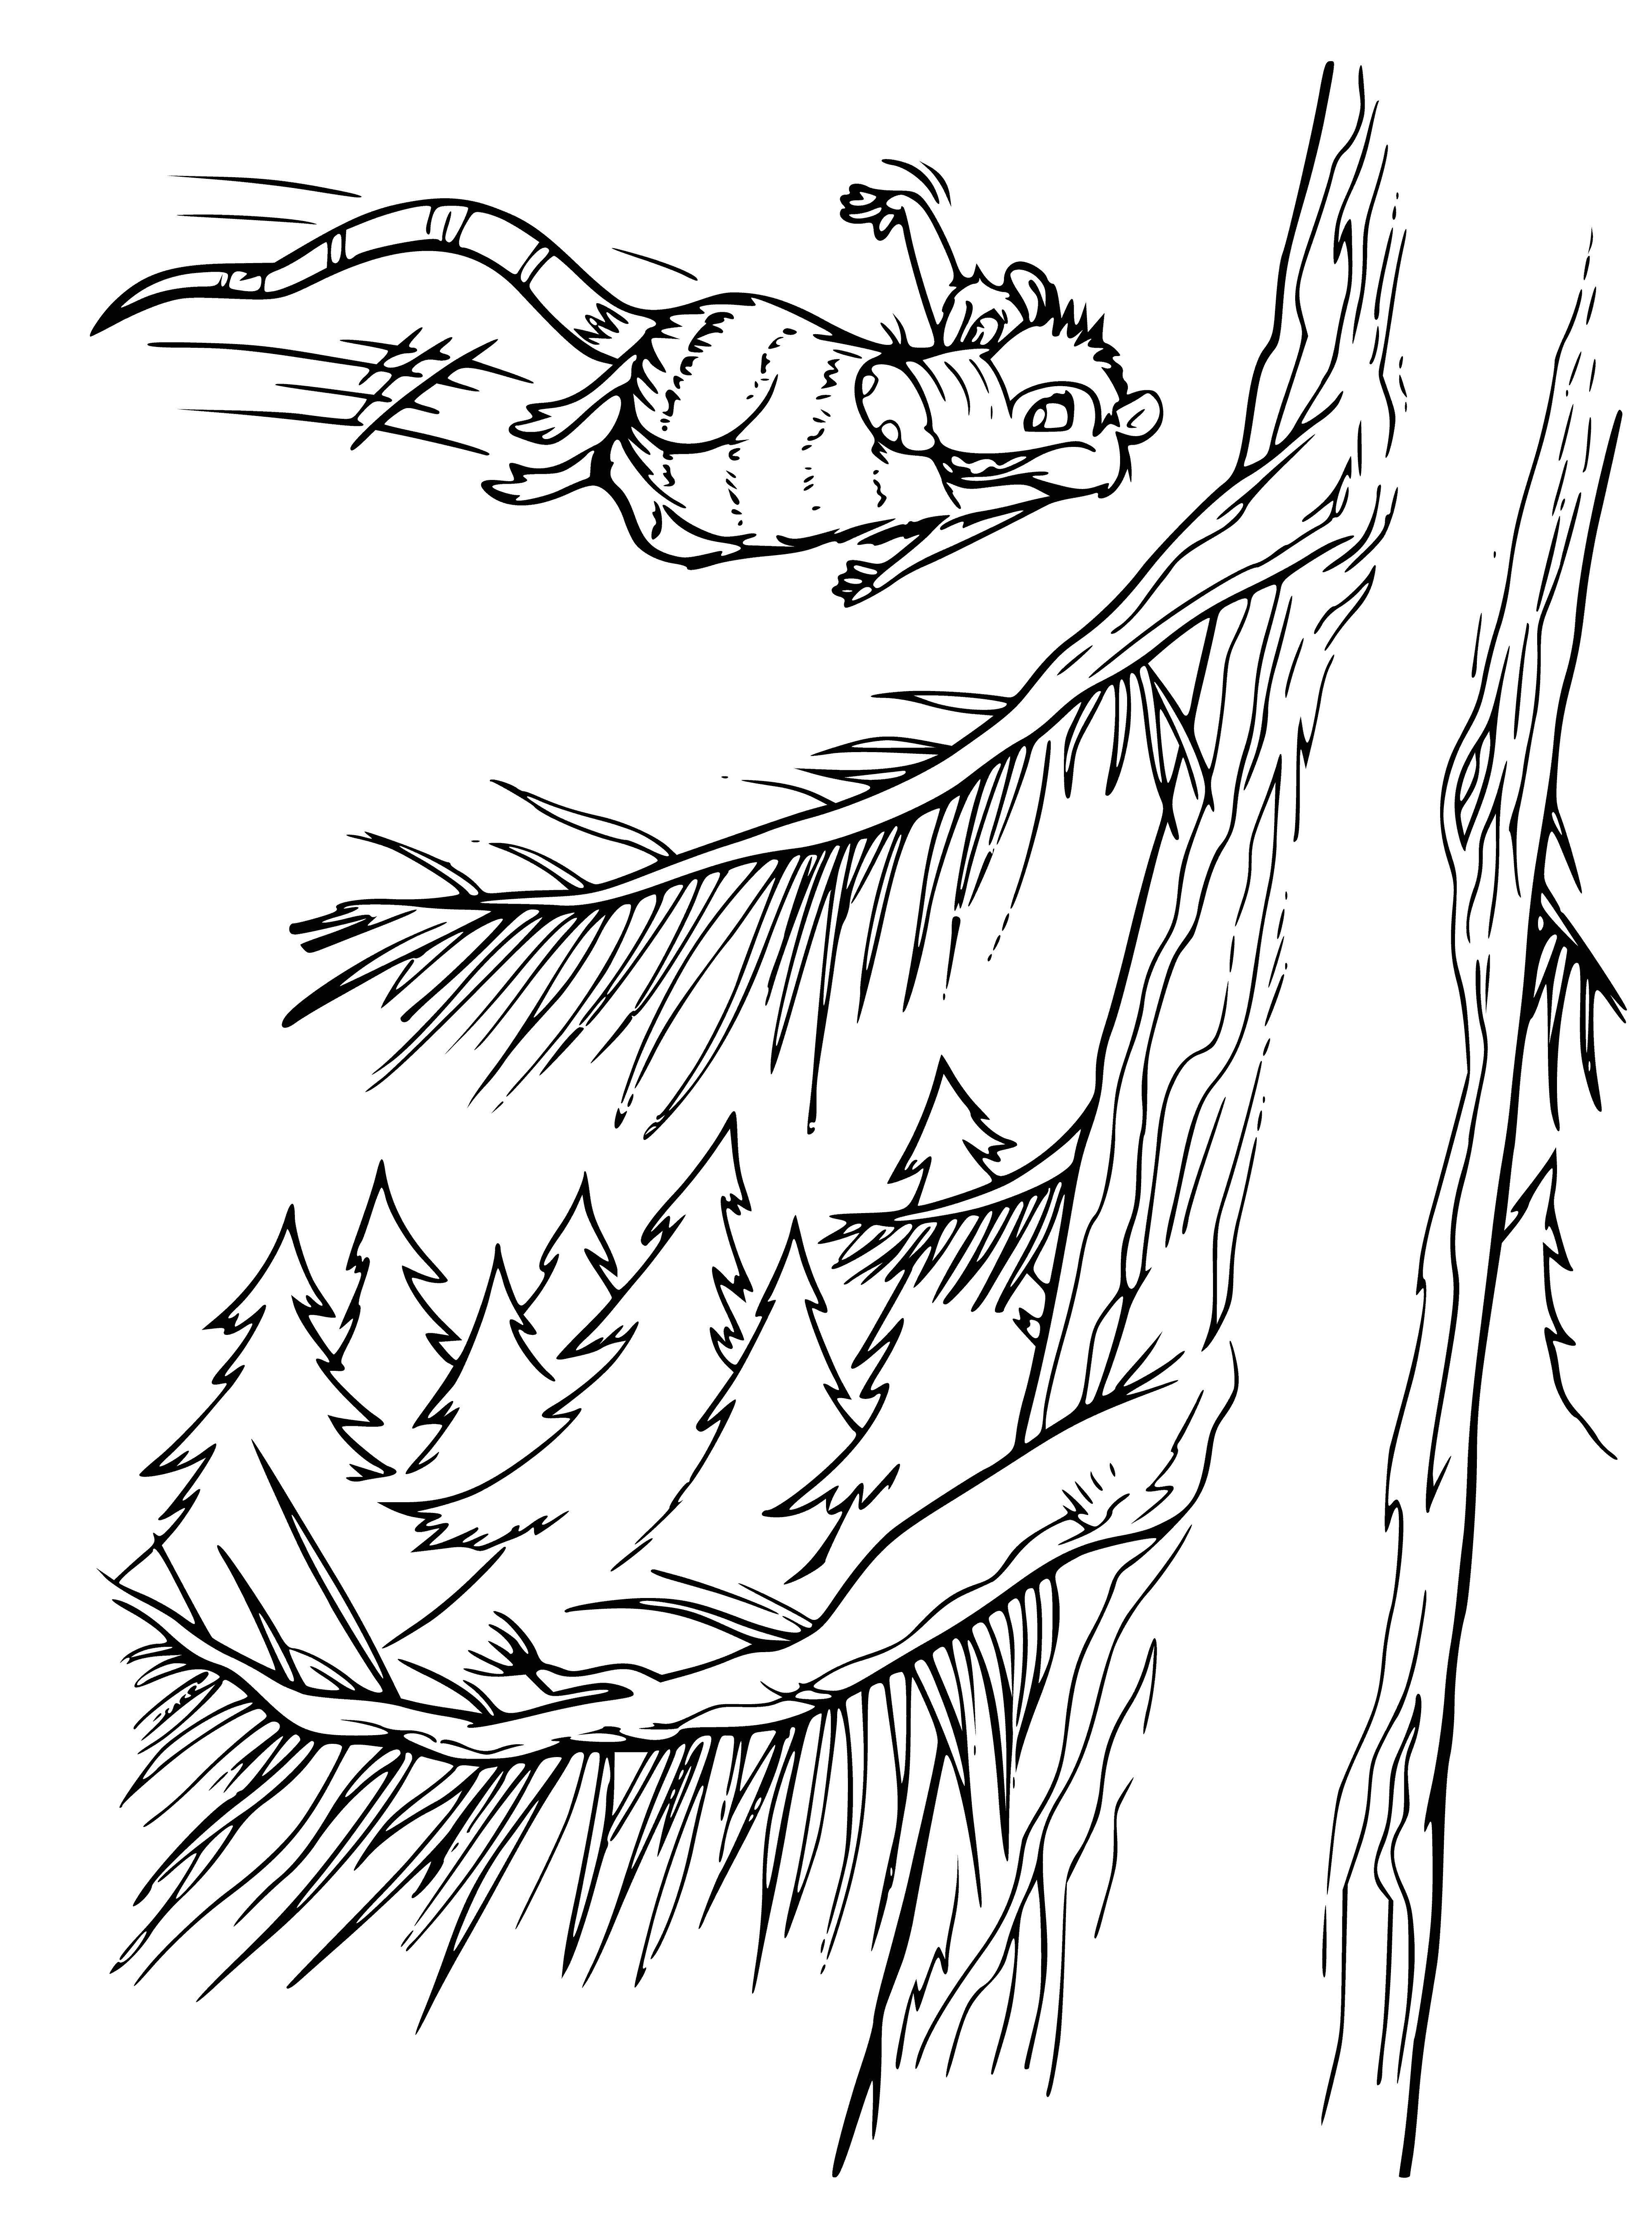 coloring page: A flock of multi-colored possums flying in a V-shaped formation against a deep blue sky with clouds in the distance.